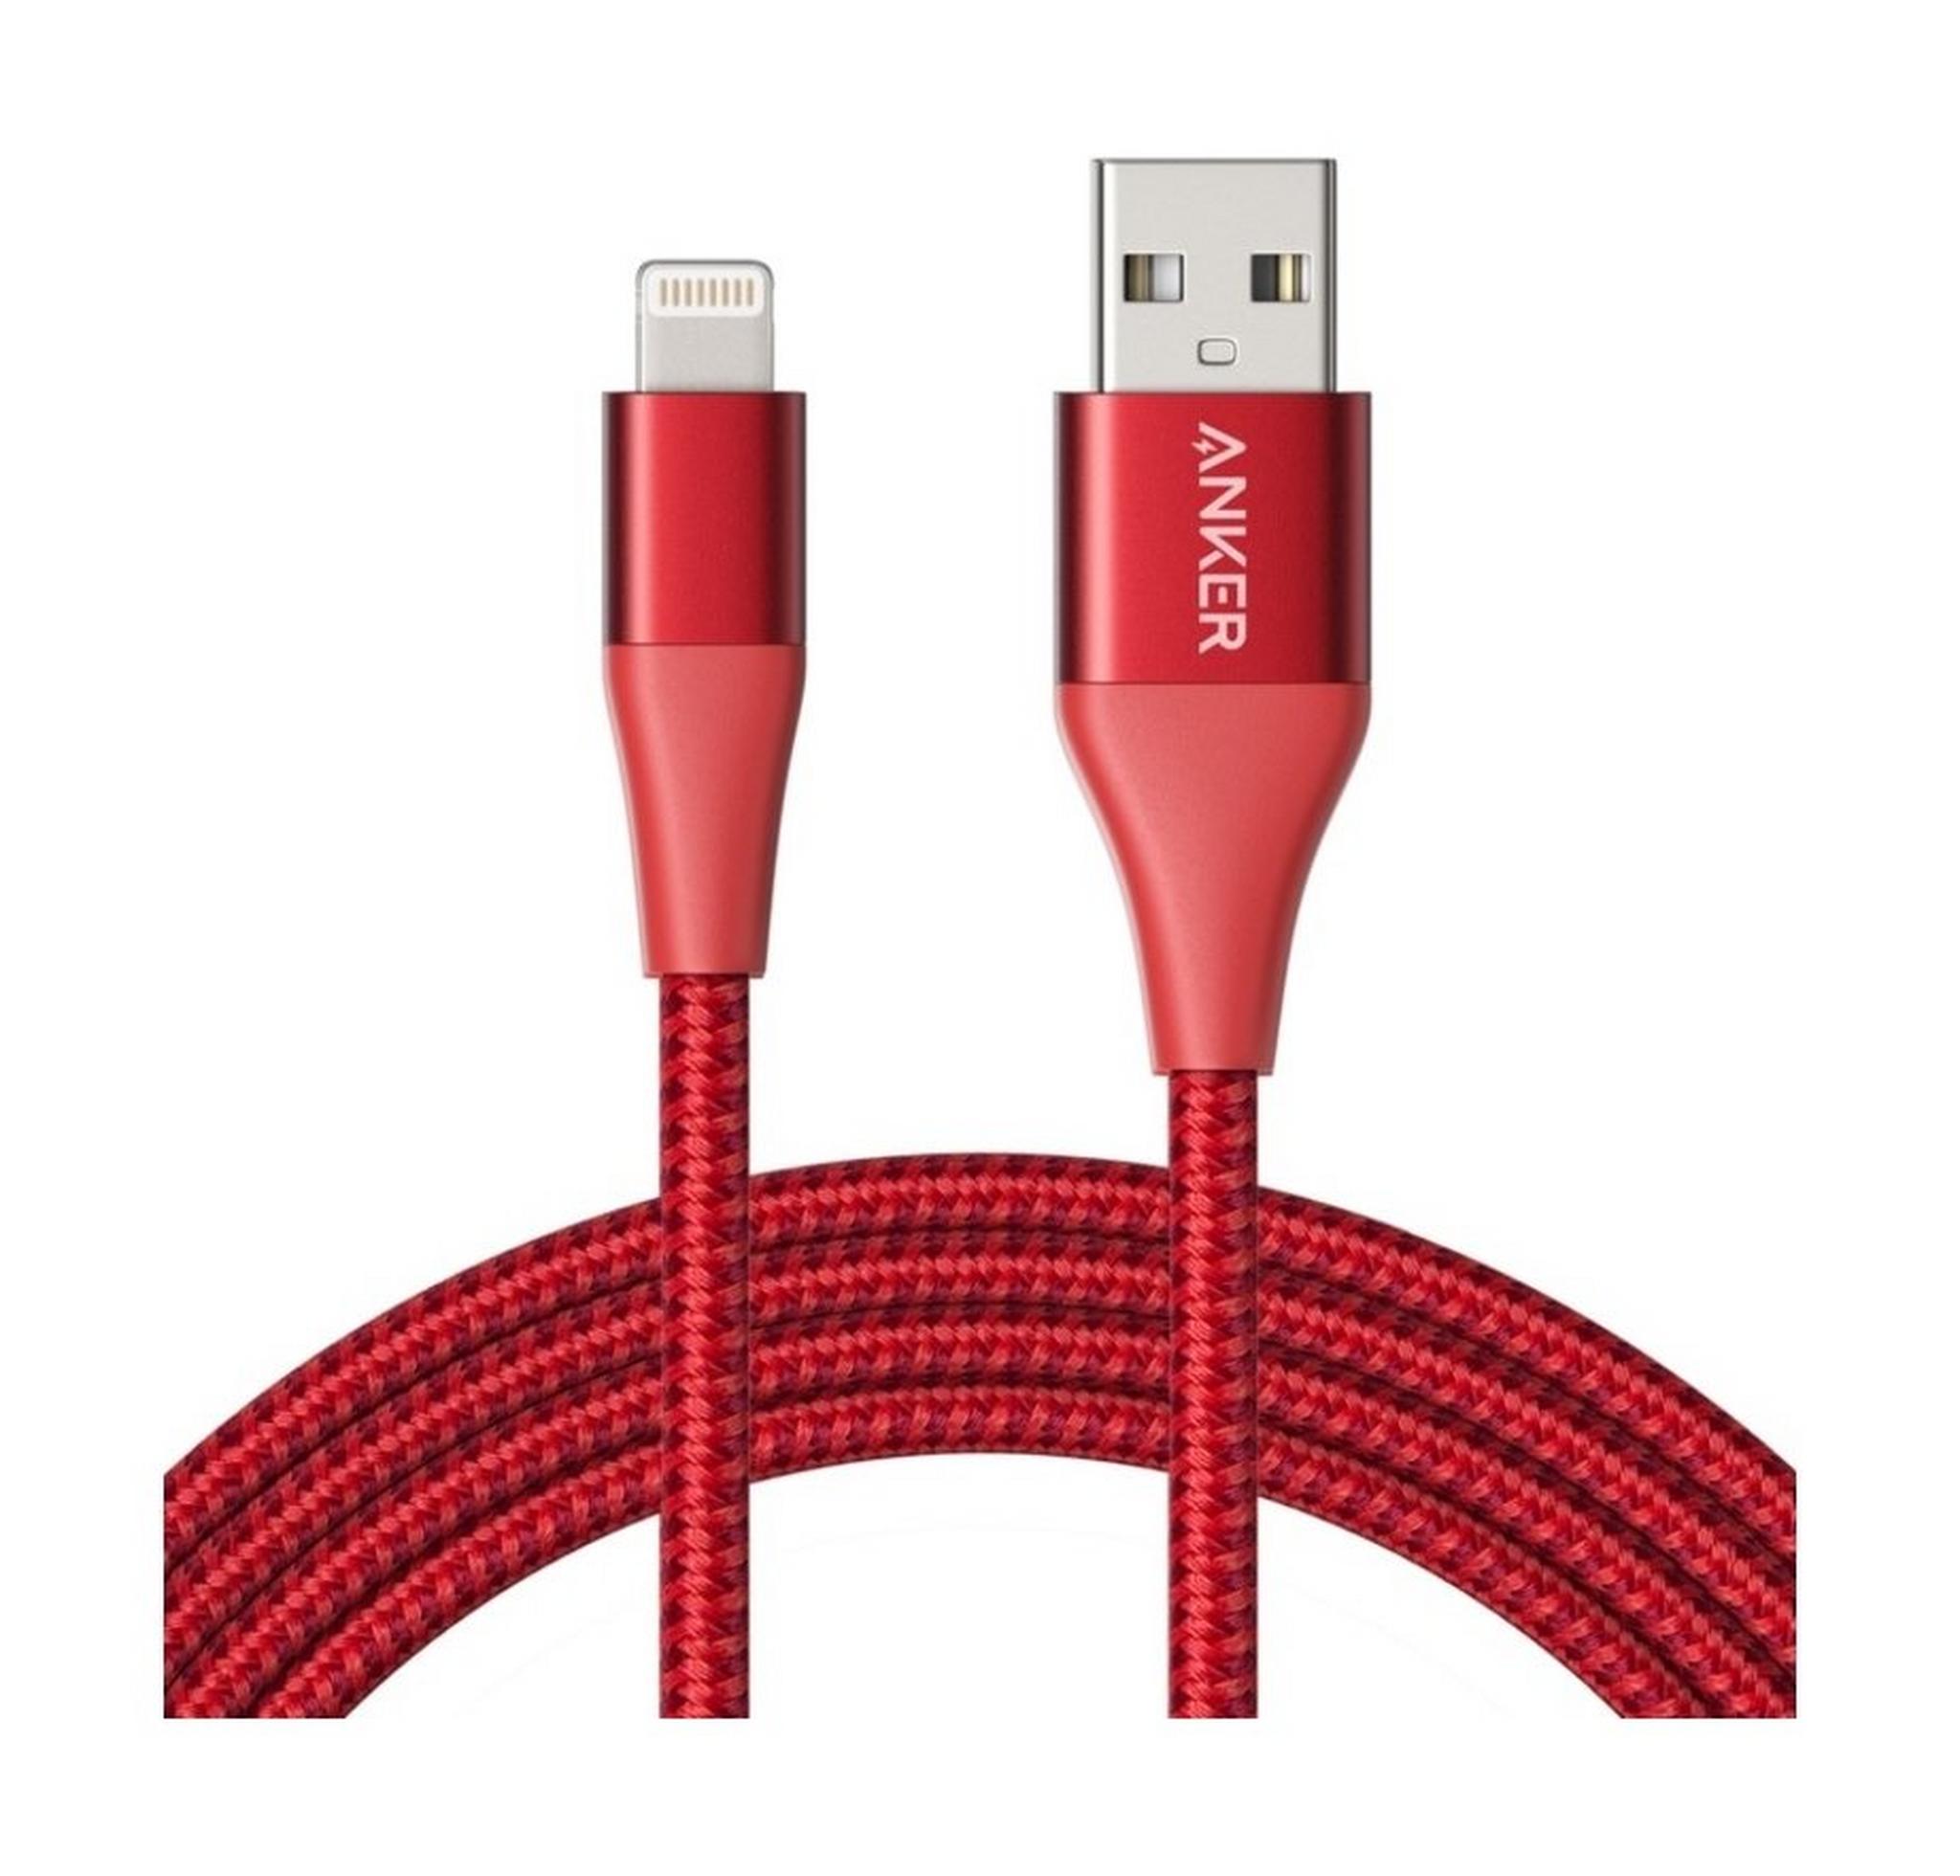 Anker Powerline+ II 1.8M Lightning Cable - Red